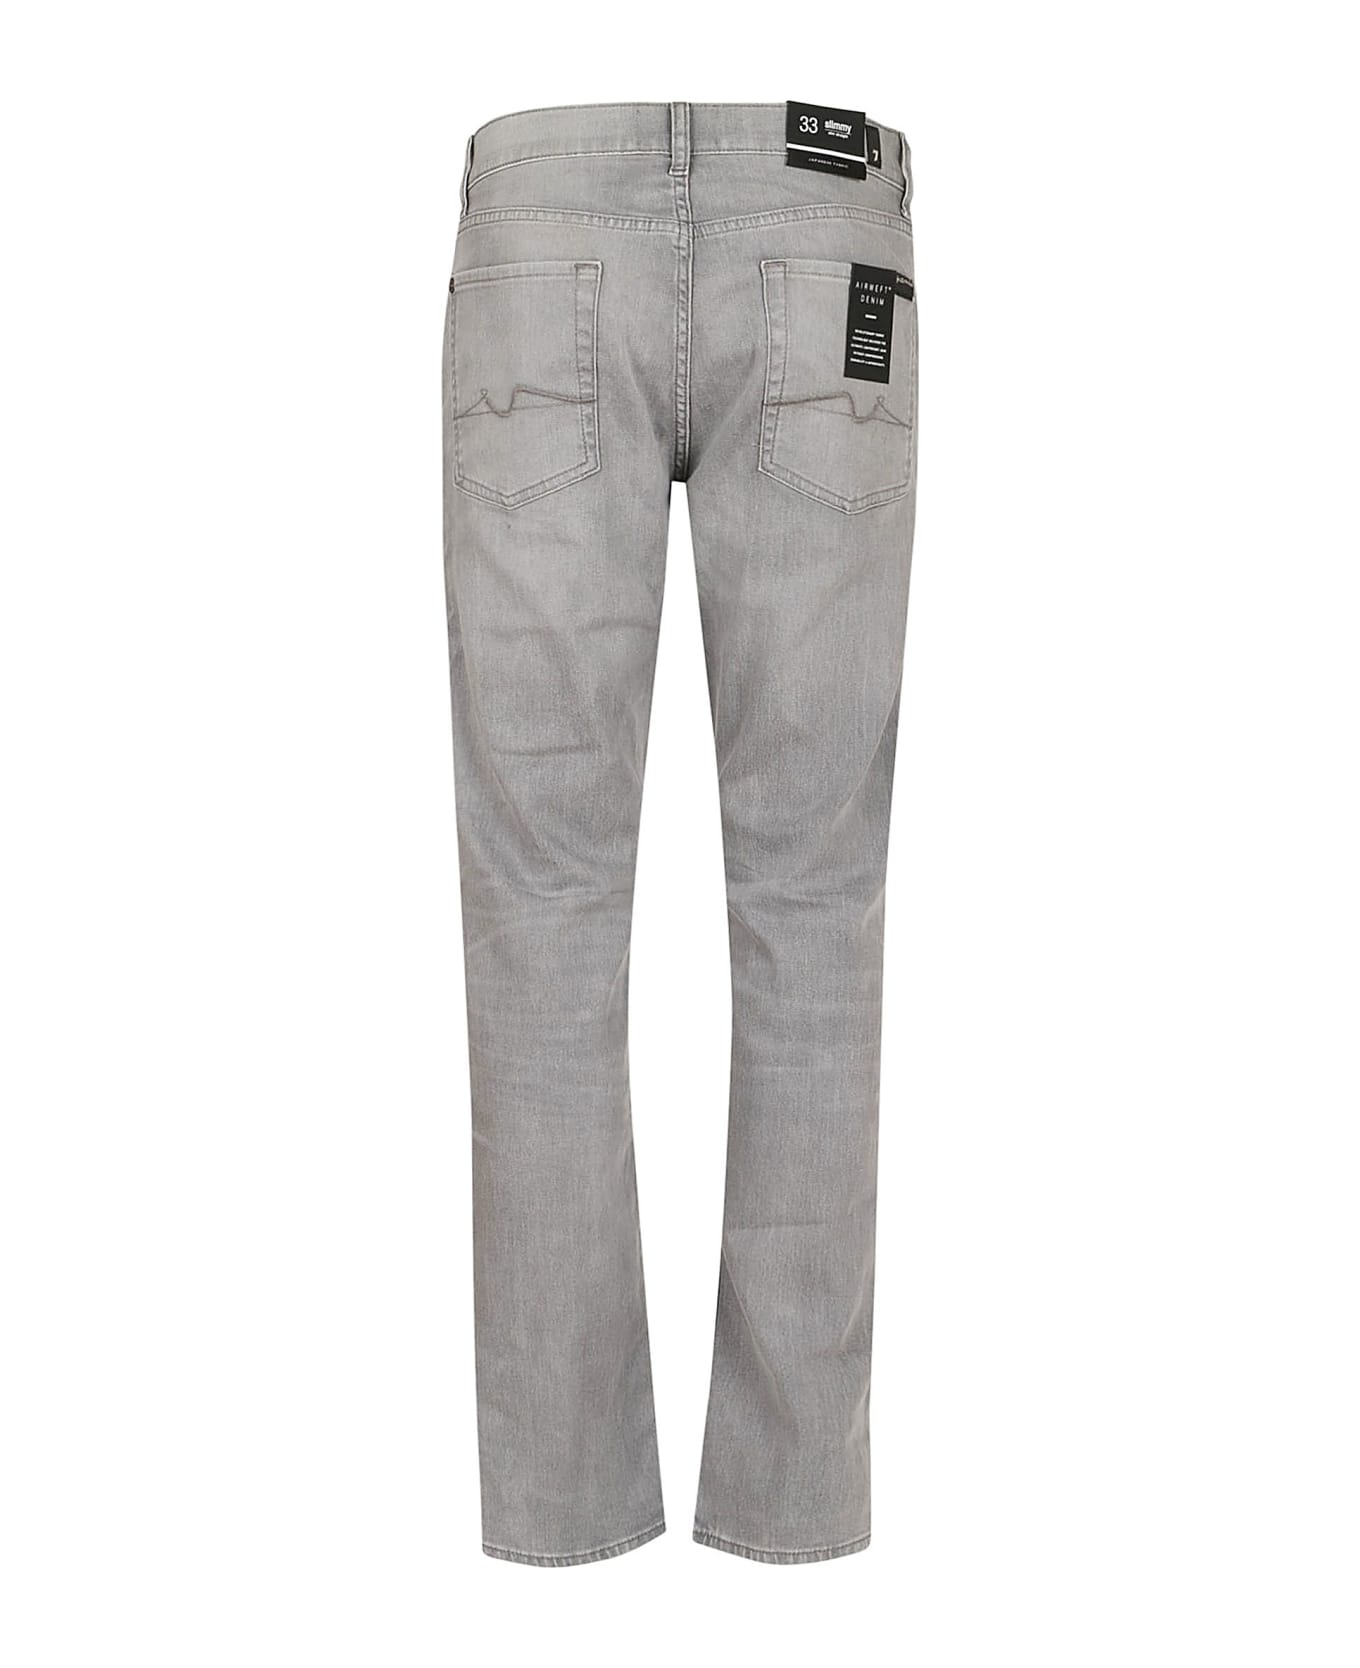 7 For All Mankind Slimmy Advance - Grey デニム